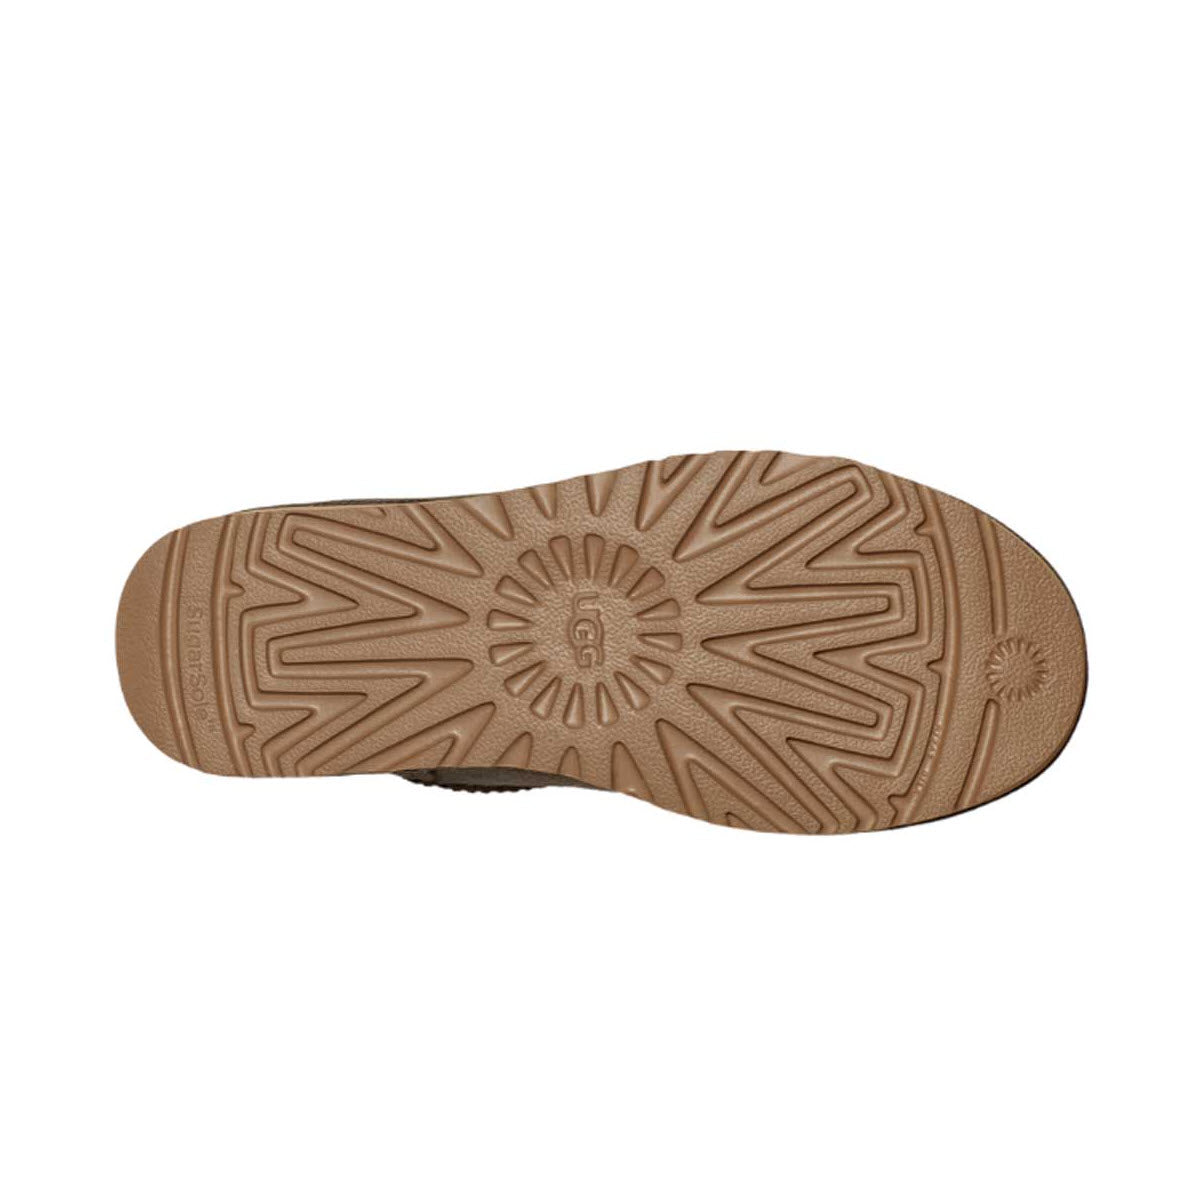 The image showcases the sole of an Ugg Classic Ultra Mini Forest Night - Womens shoe with a textured pattern and the &quot;UGG&quot; brand logo in the center. The light brown sole, featuring a Treadlite outsole with grooves for traction, complements the comfort of its sheepskin insole.